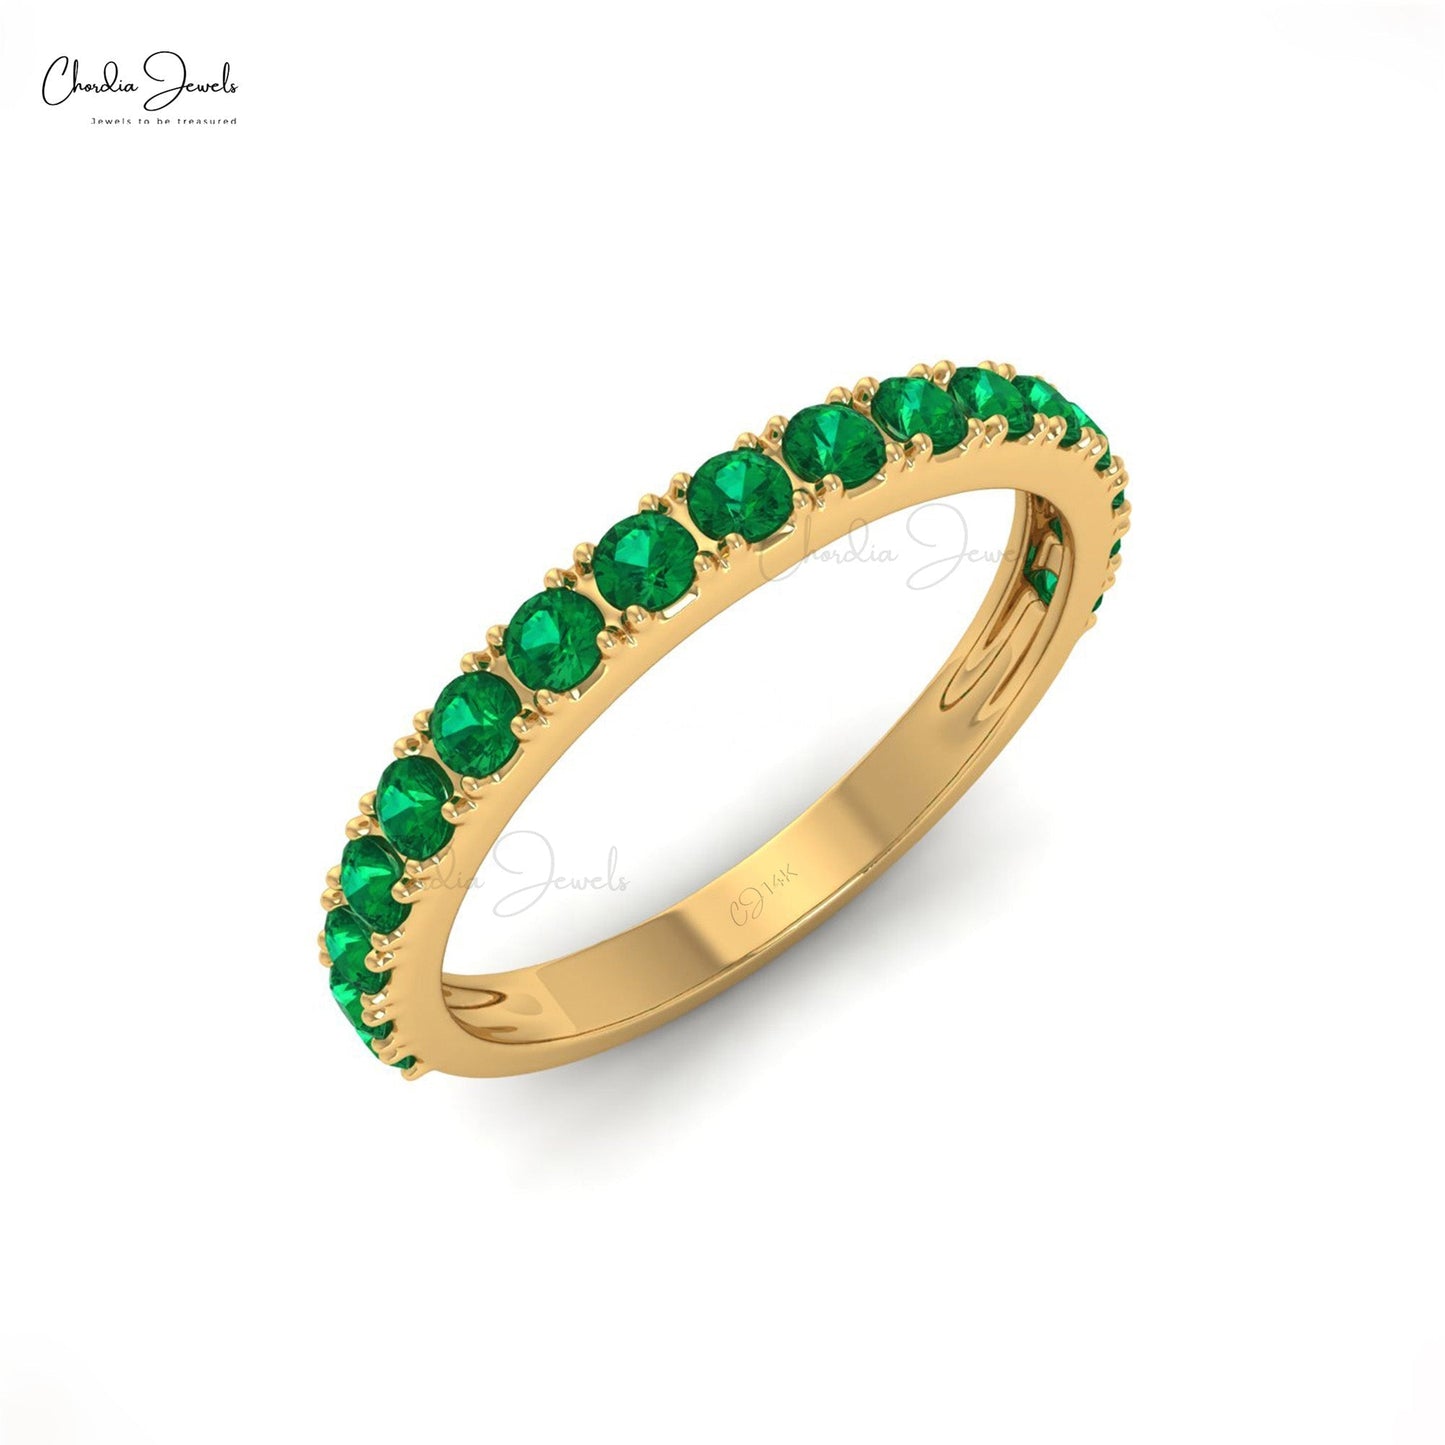 Load image into Gallery viewer, Natural Emerald Stone Half Eternity Band Ring in 14k Solid Gold
